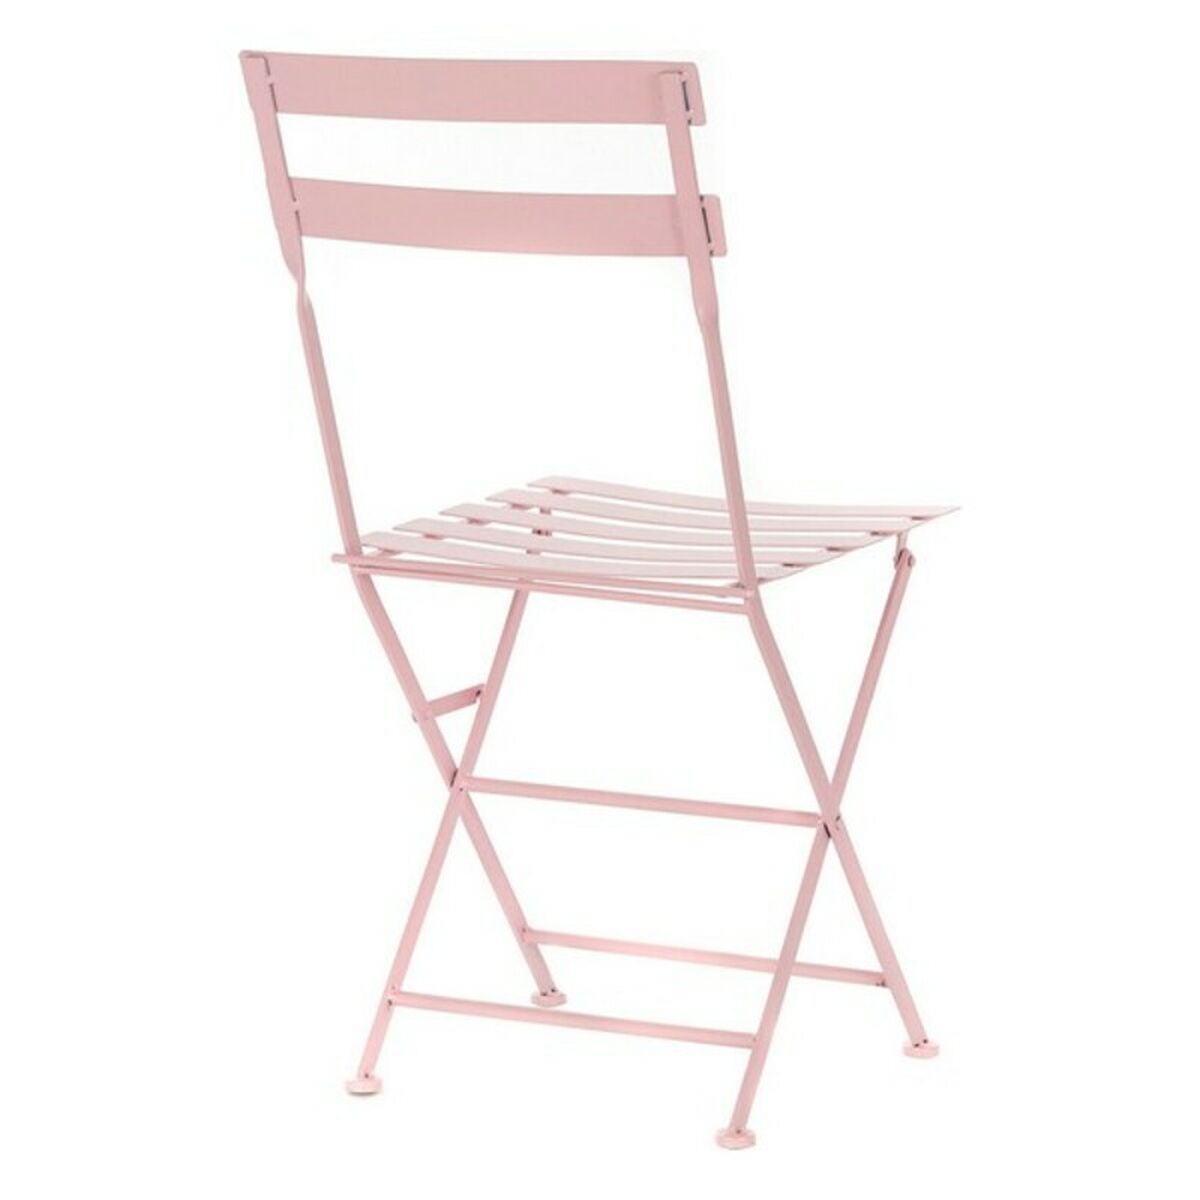 Table set with 2 chairs DKD Home Decor MB-177410 Pink 60 x 60 x 75 cm